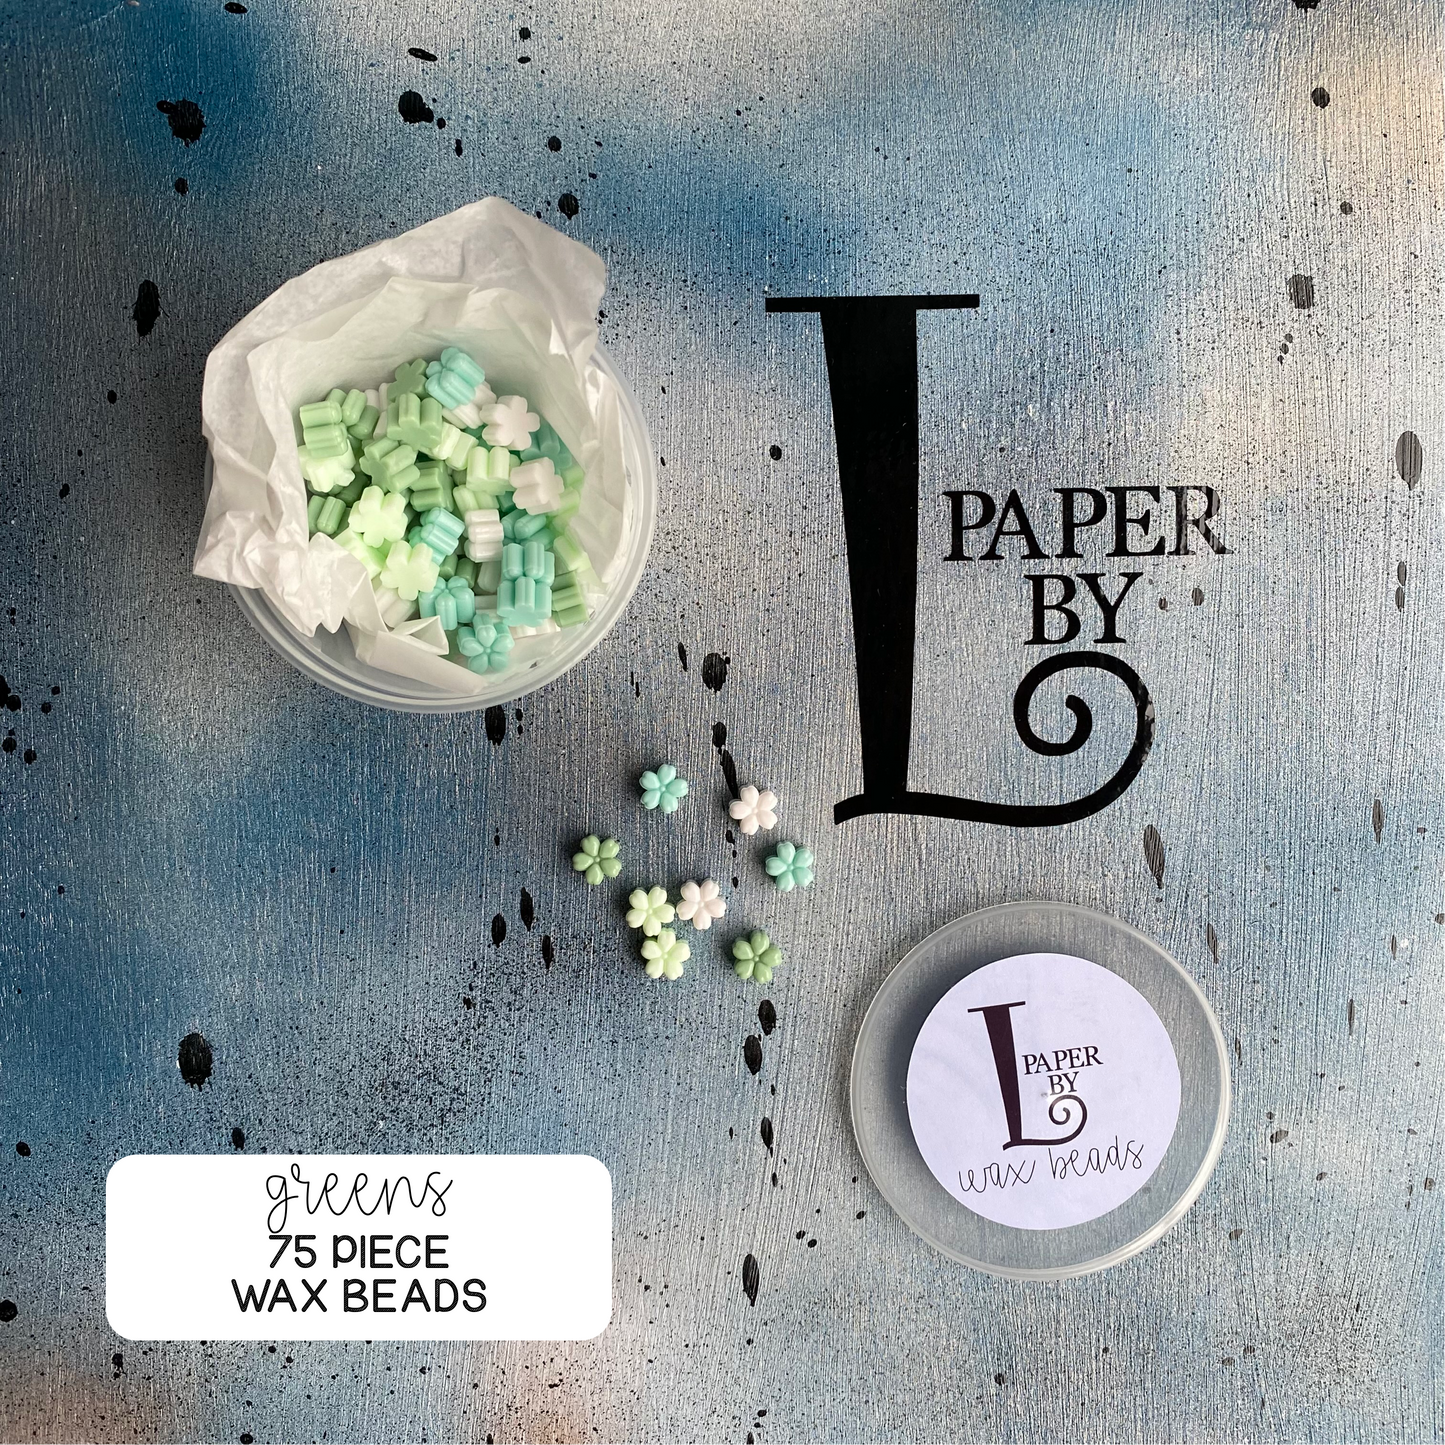 Wax Beads - Paper by L